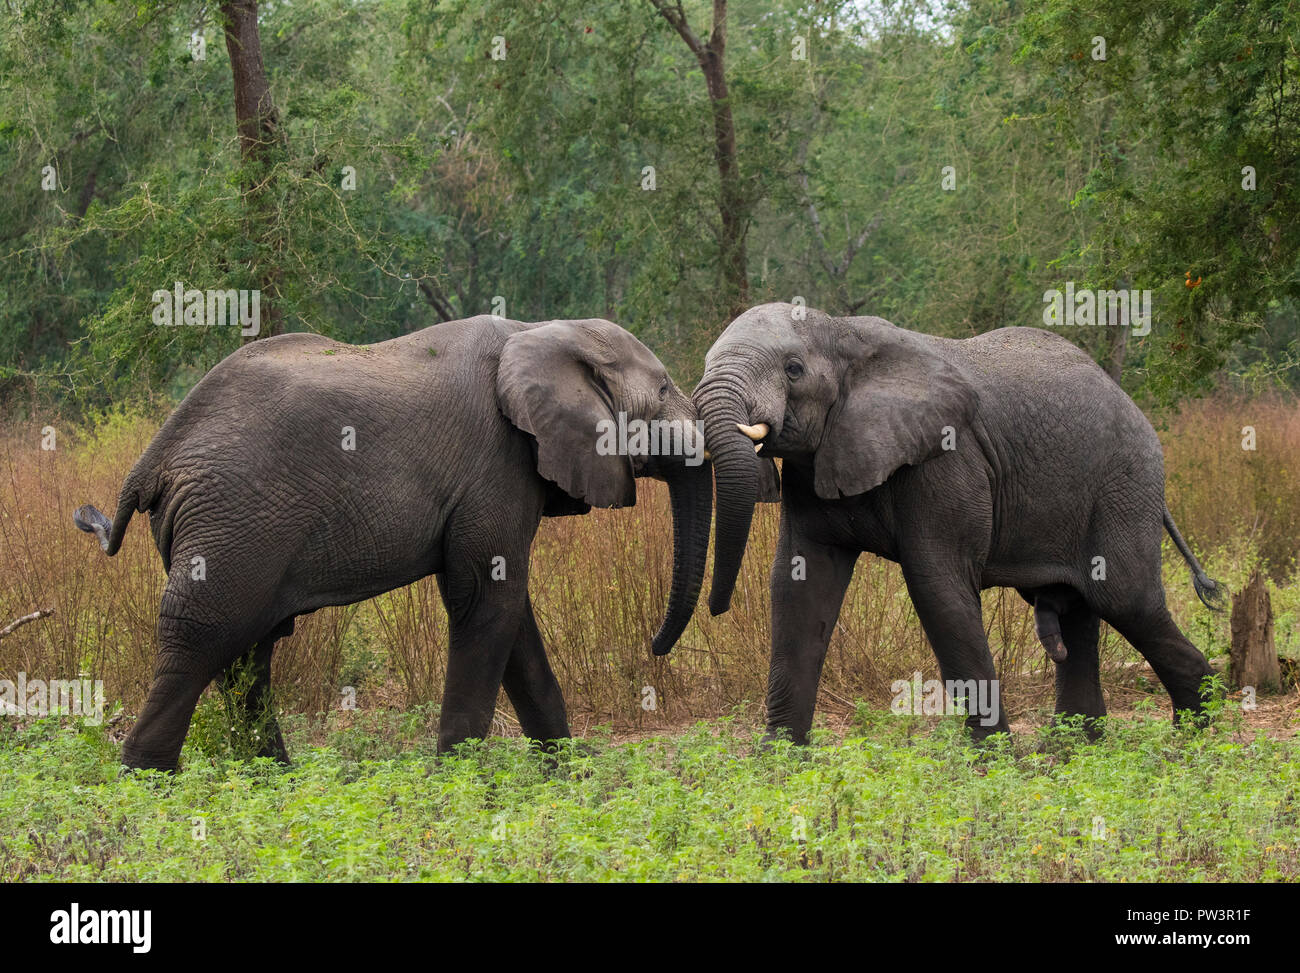 AFRICAN ELEPHANT (Loxodonta africana) two young males bonding, Gorongosa National Park, Mozambique. Vulnerable species Stock Photo